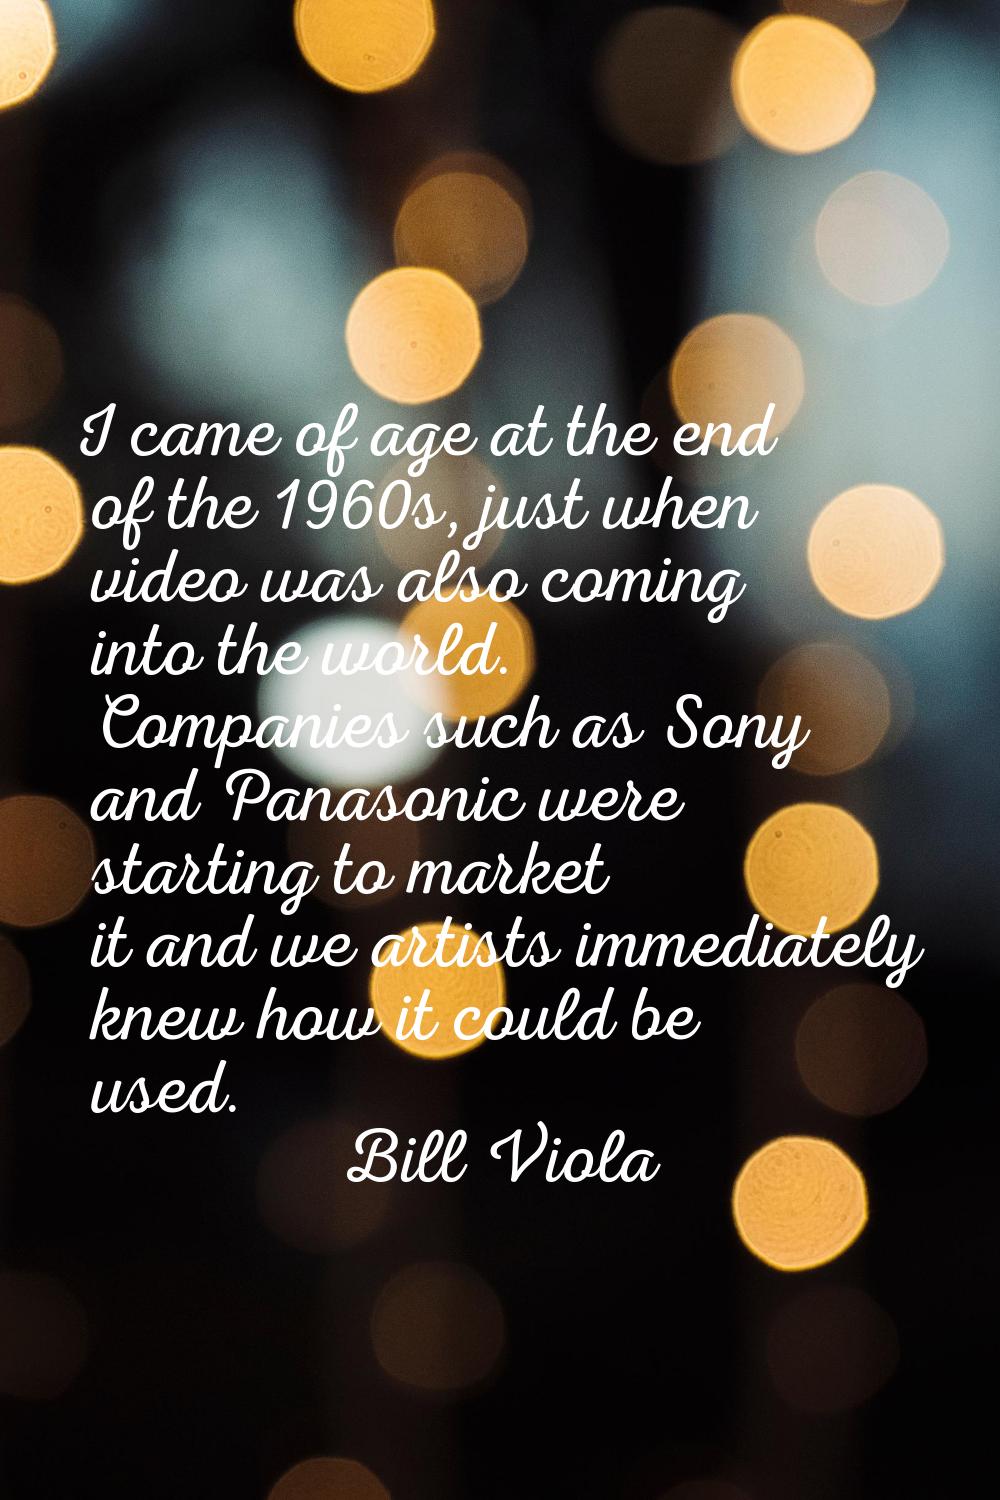 I came of age at the end of the 1960s, just when video was also coming into the world. Companies su